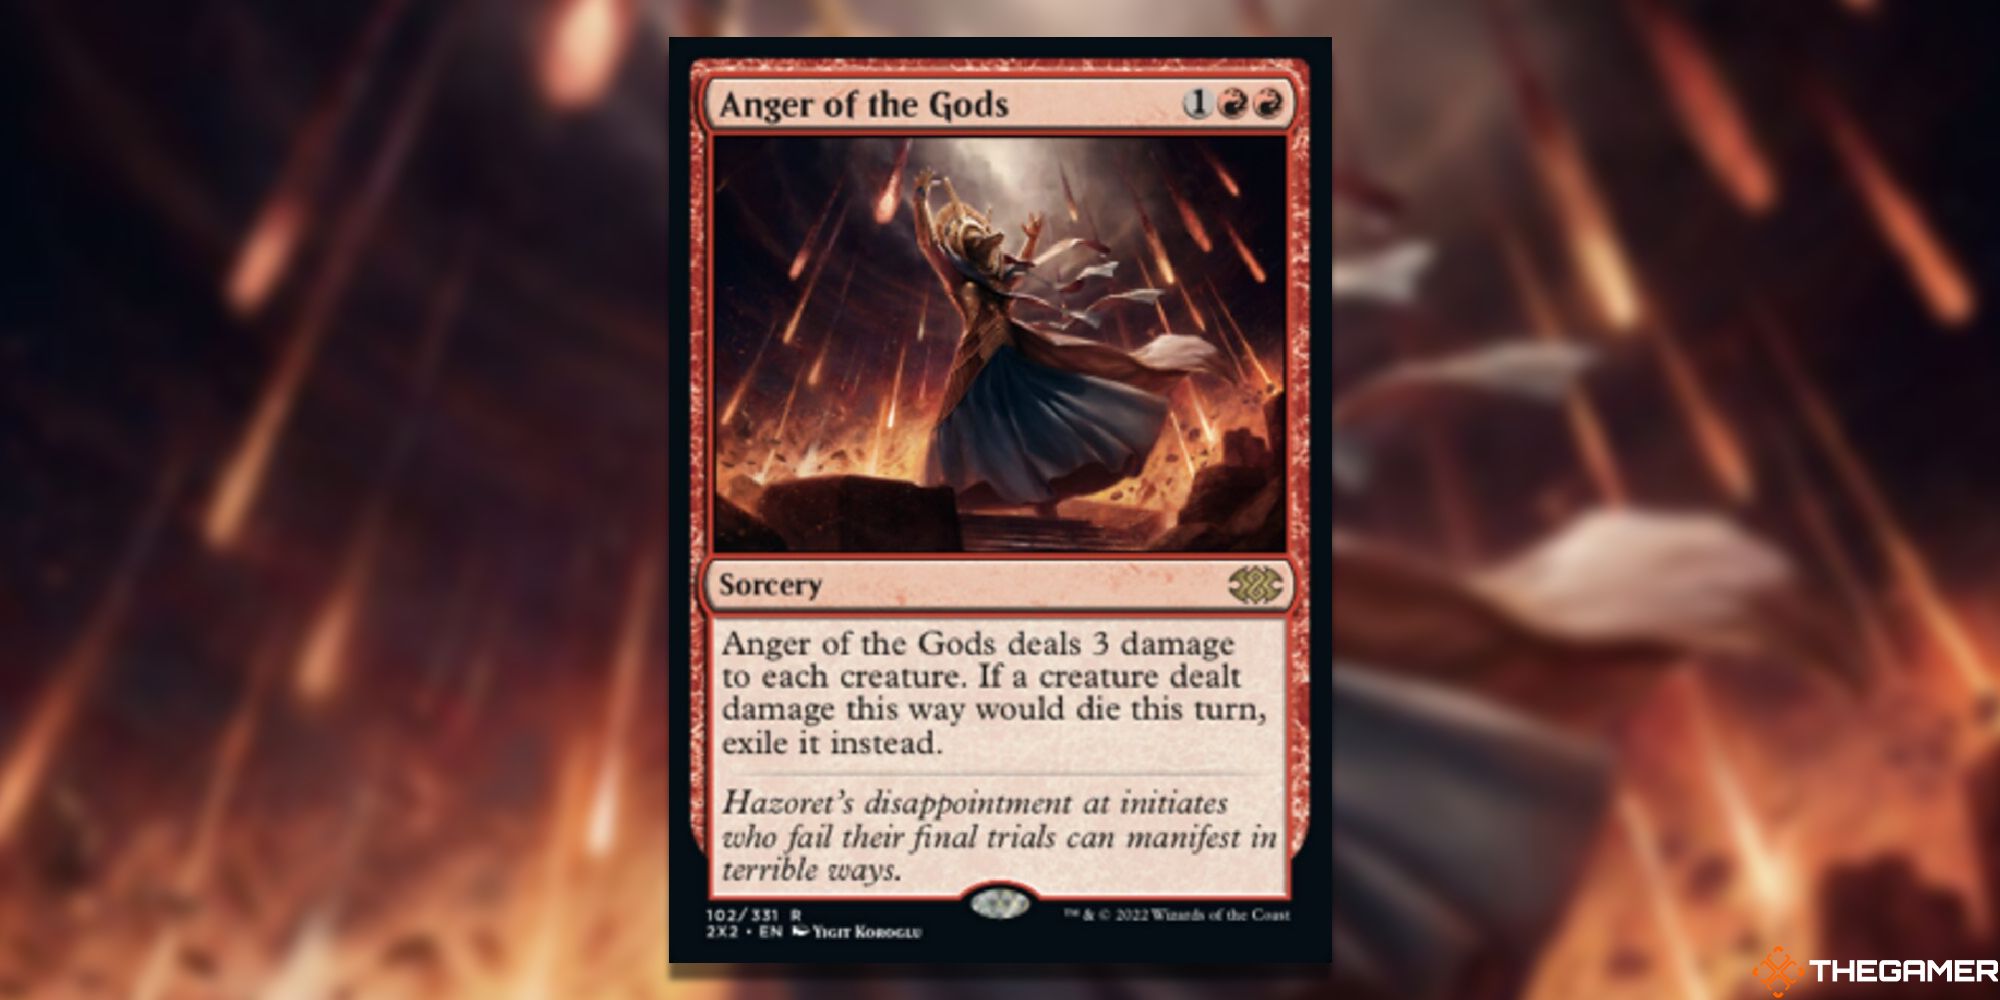 Magic: The Gathering Anger of the Gods full card with background